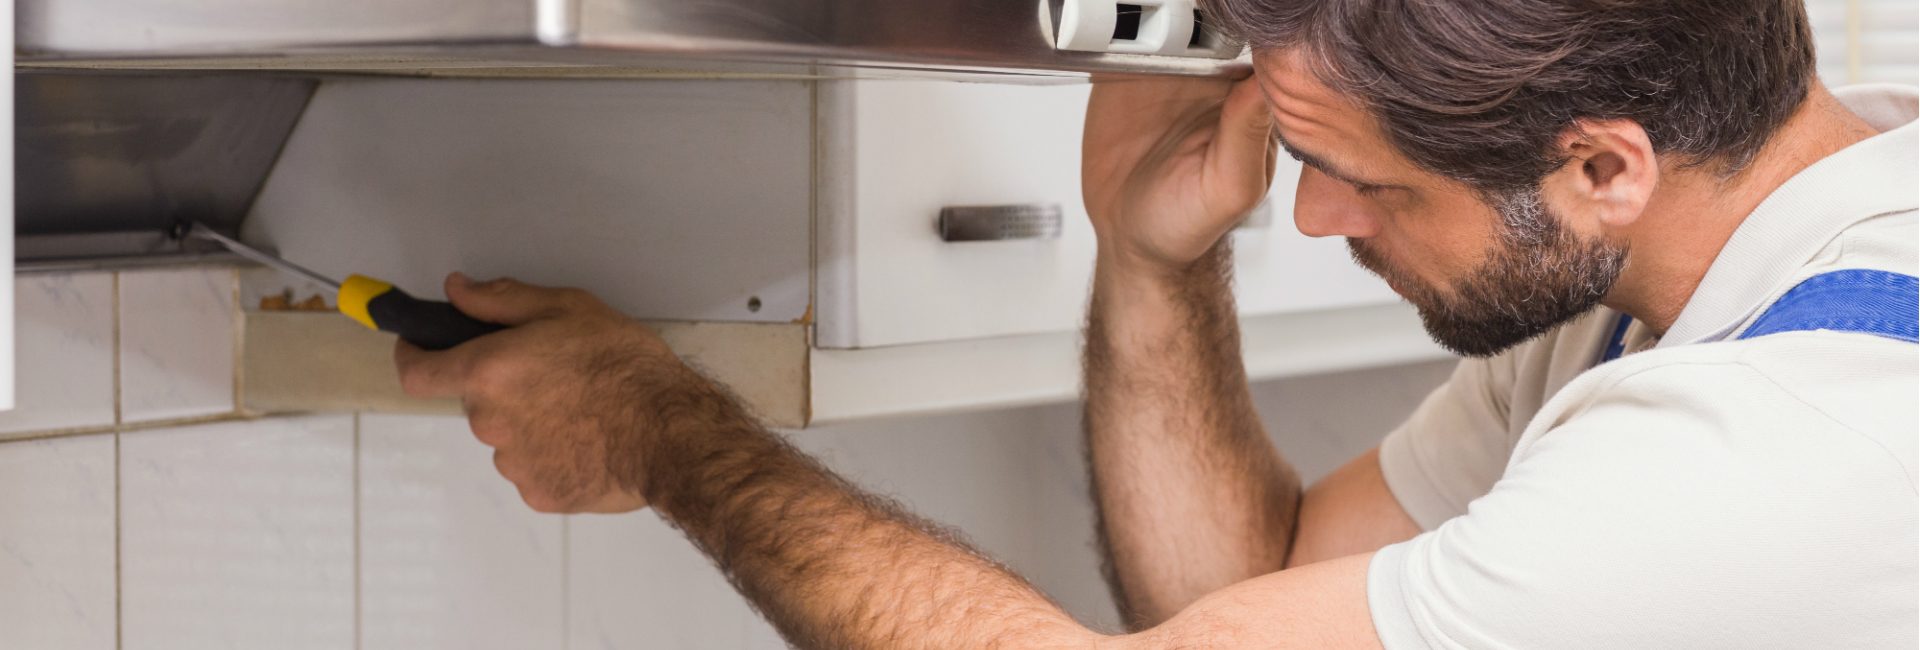 Melbourne's leading appliance servicing and repair people